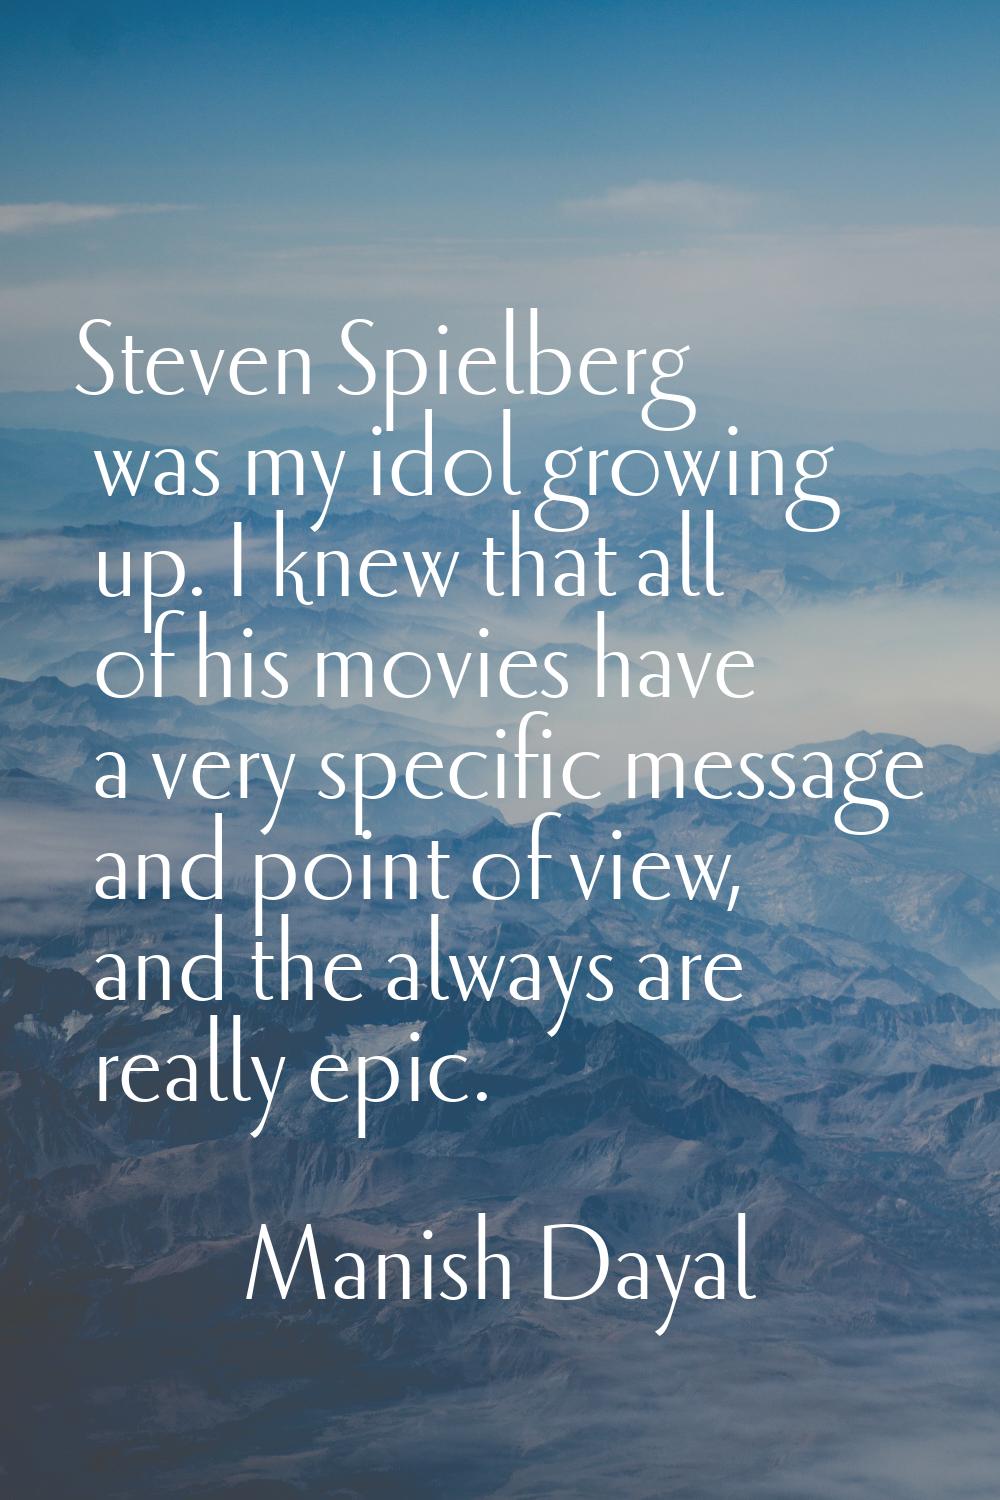 Steven Spielberg was my idol growing up. I knew that all of his movies have a very specific message